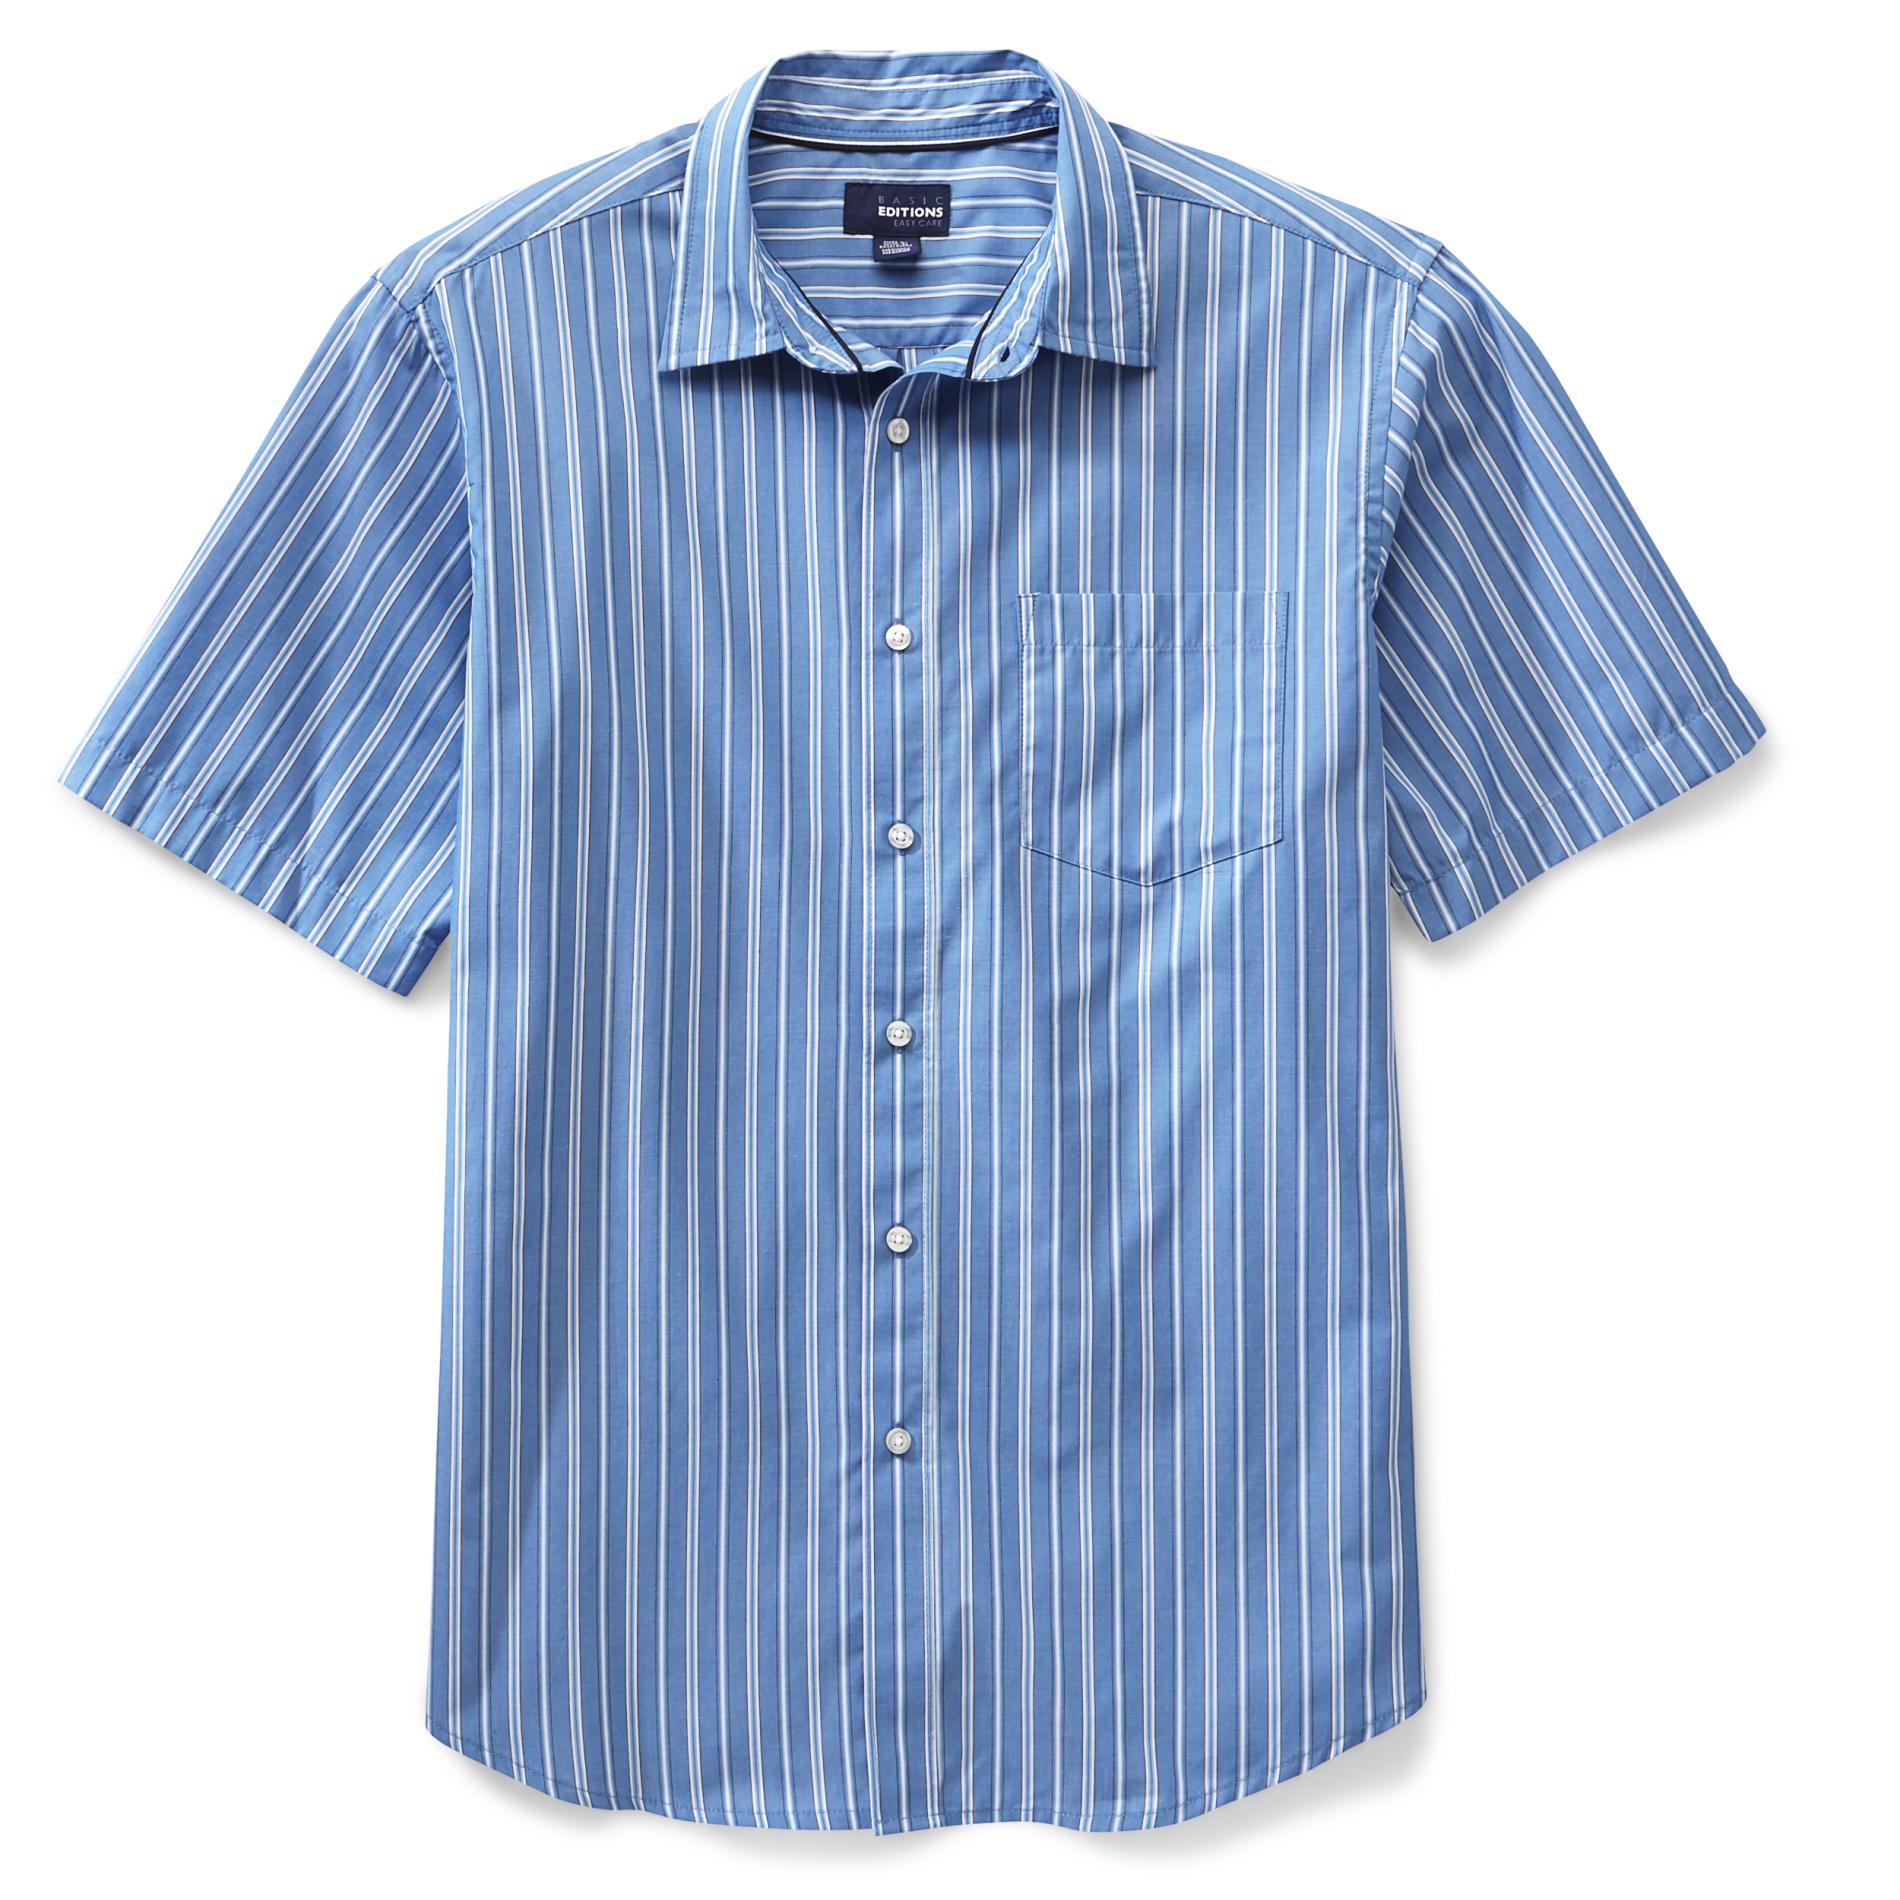 Basic Editions Men's Easy Care Woven Shirt - Striped